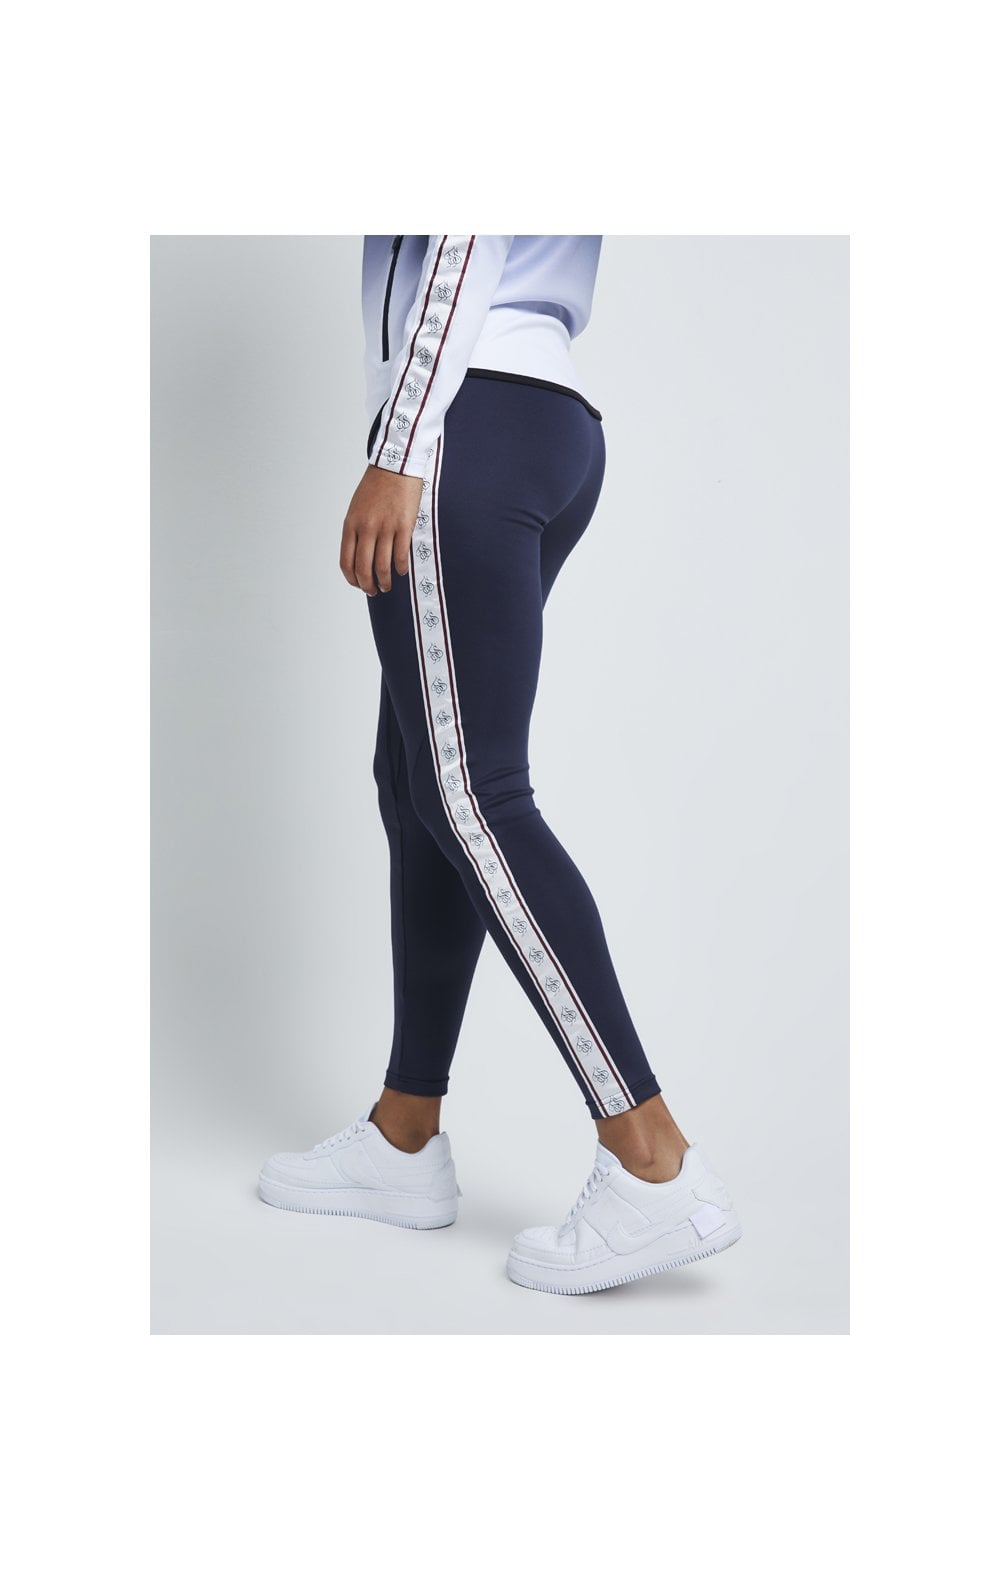 Load image into Gallery viewer, SikSilk Tape Athlete Track Pants - Ebony (4)